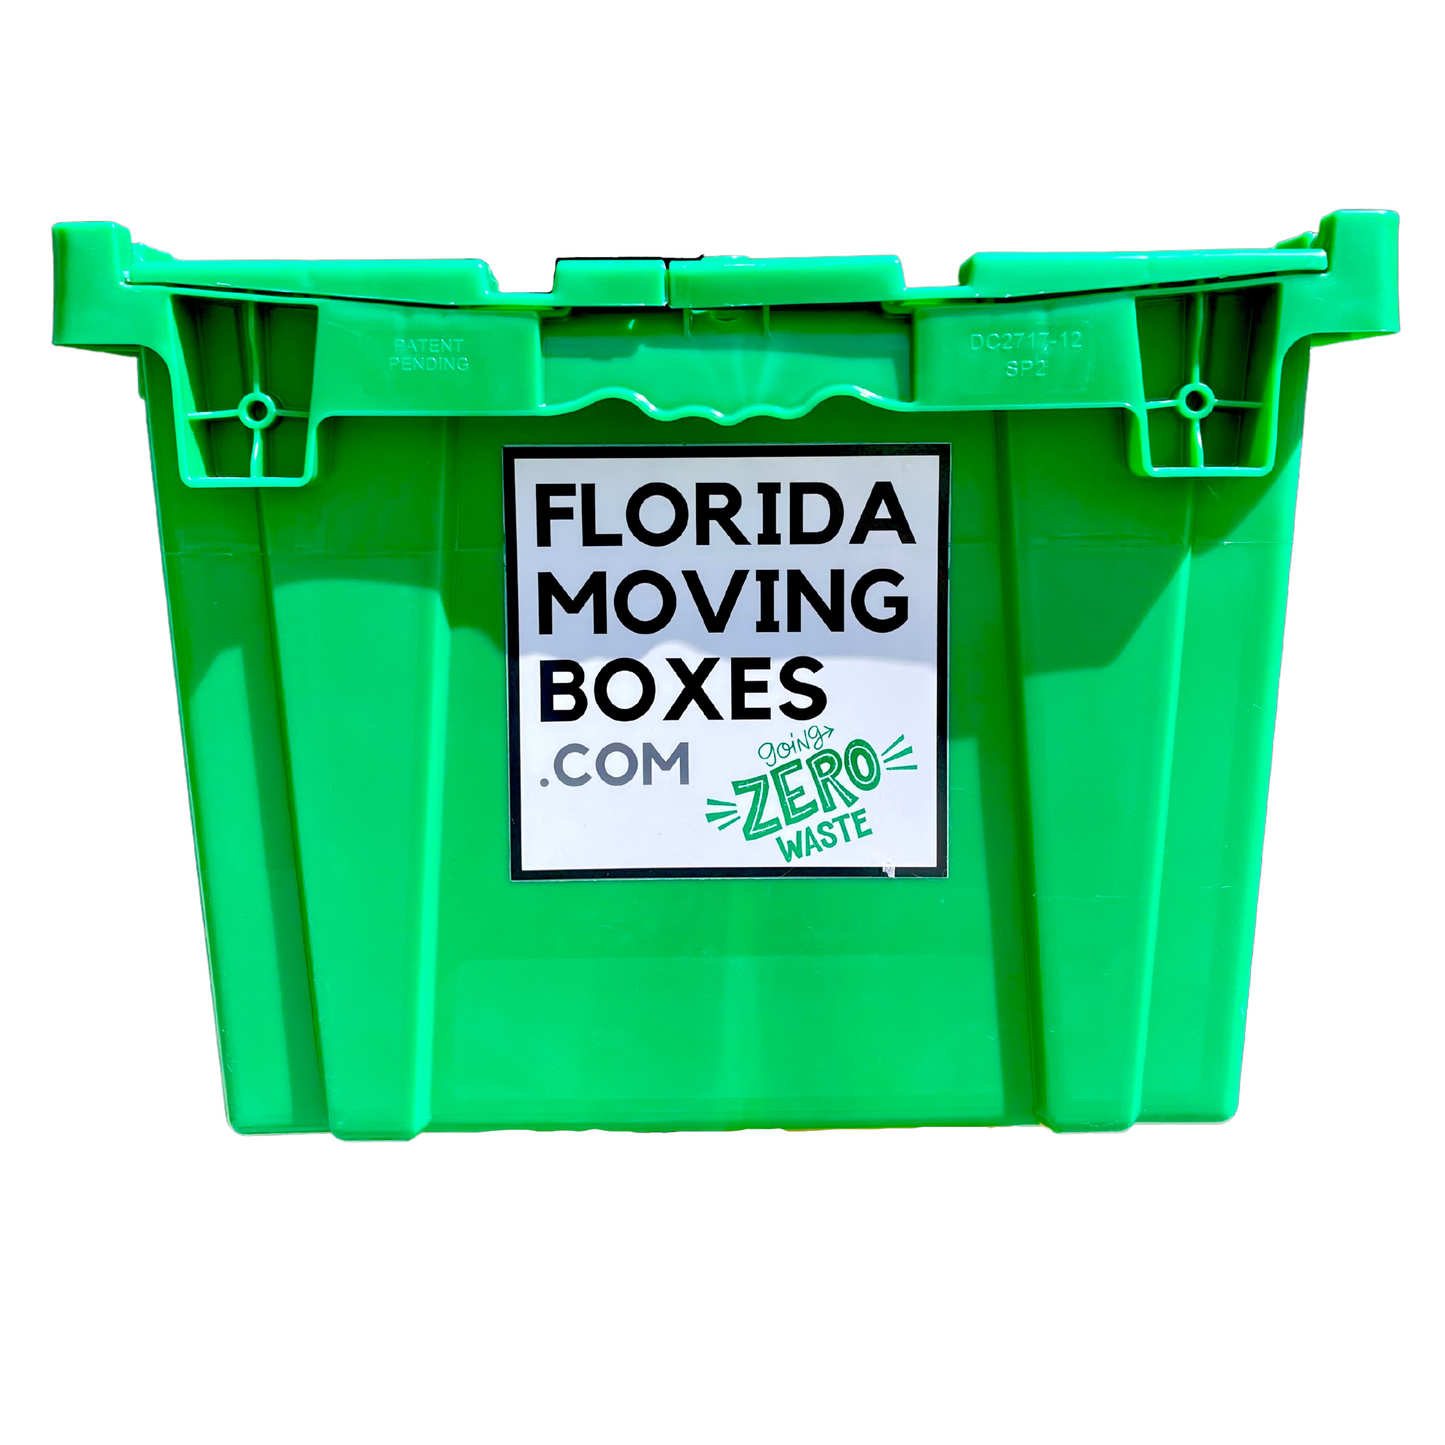 commercial moving storage boxes bins crates relocation remodel renovation corporate office projects rentals rent Orlando Maitland Winter Park Winter Garden Windermere Lake Nona Baldwin Park Altamonte Springs Lake Mary Heathrow Florida FL reusable eco-friendly sustainable sustainability recycle